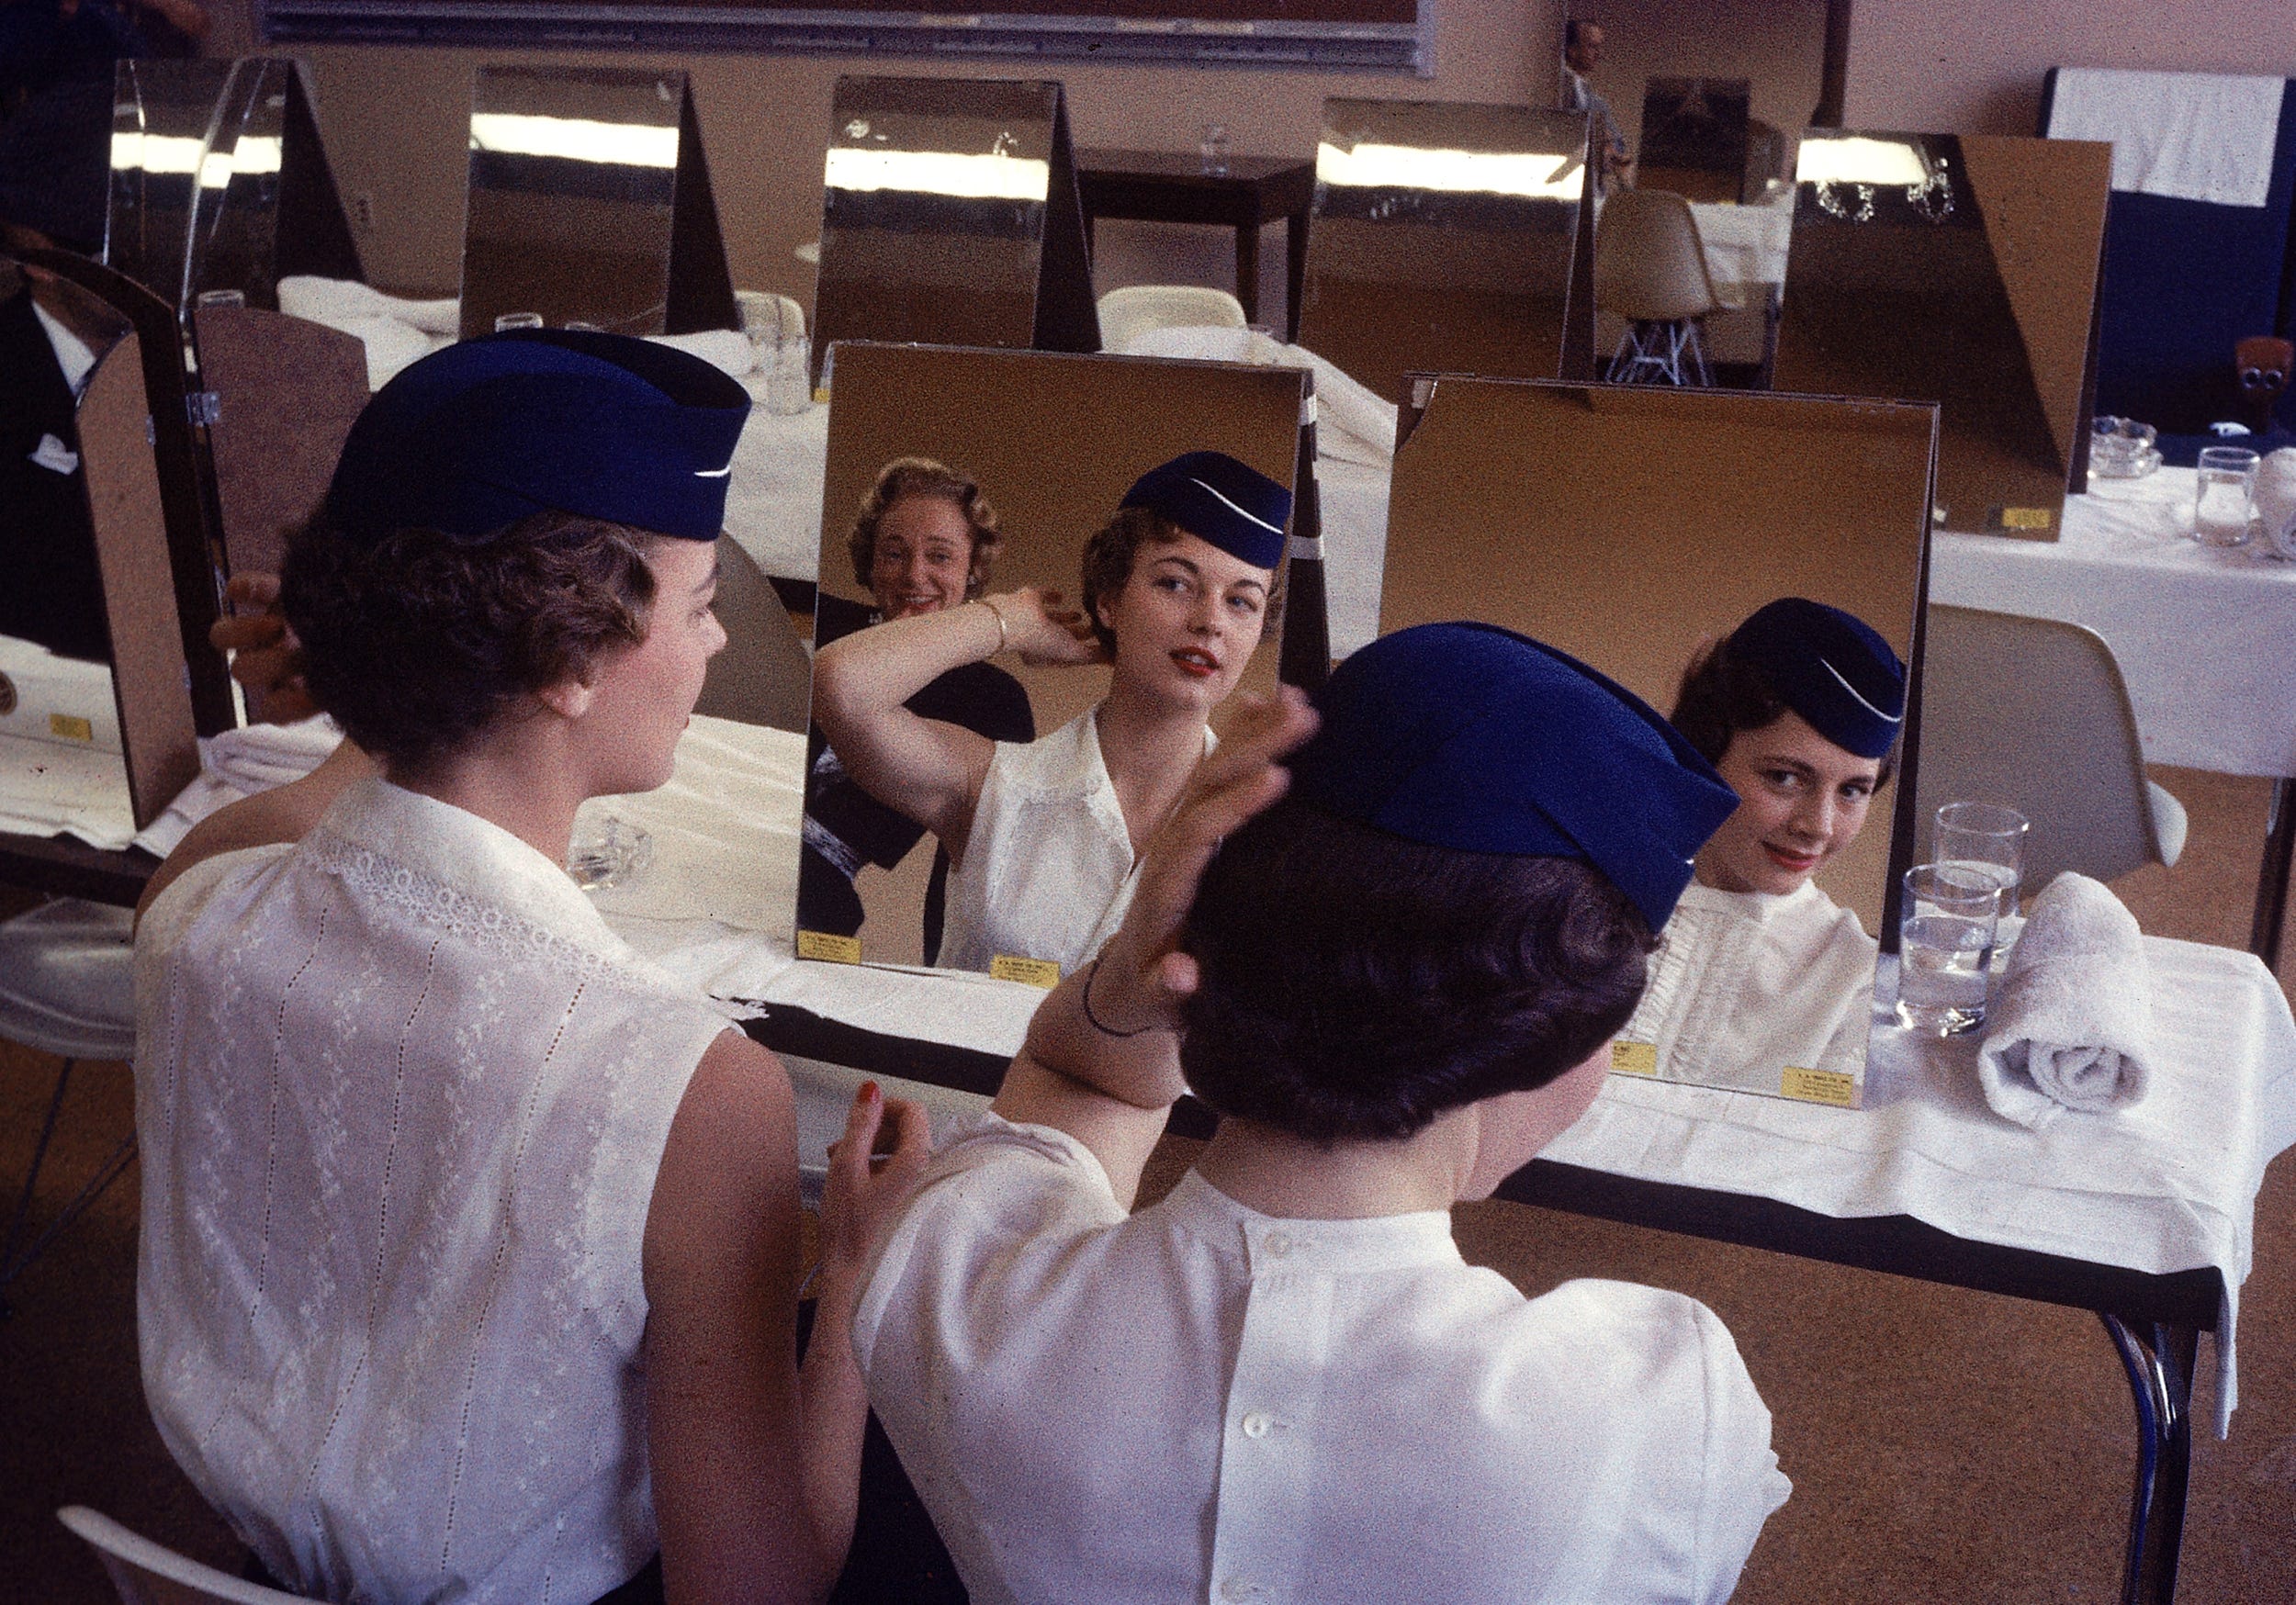 Sexy Stewardesses Were Exploited By Airlines To Sell More Tickets — Until Women Fought Back